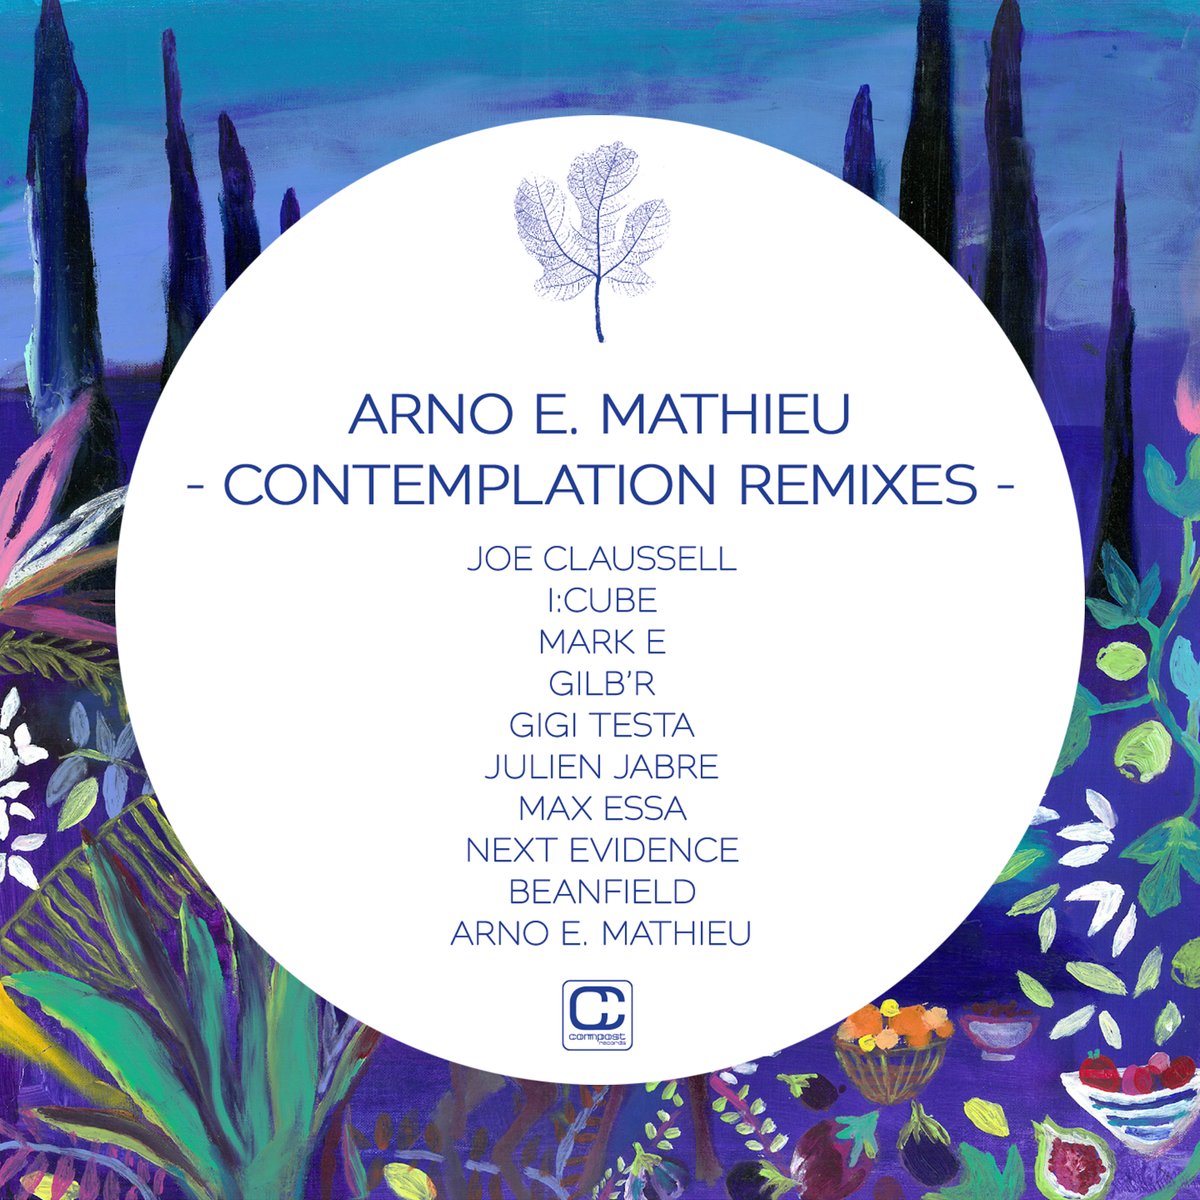 Arno E. Mathieu 'Contemplation Remixes' OUT NOW as 2x12' vinyl package with reworks by the likes of @joeclaussell, Mark E, I:Cube, Gilb‘R, Julien Jabre, Gigi Testa, Max Essa, Beanfield, Next Evidence, Arno E. Mathieu... >>> compostrecords.lnk.to/ArnoEMathieu-C…